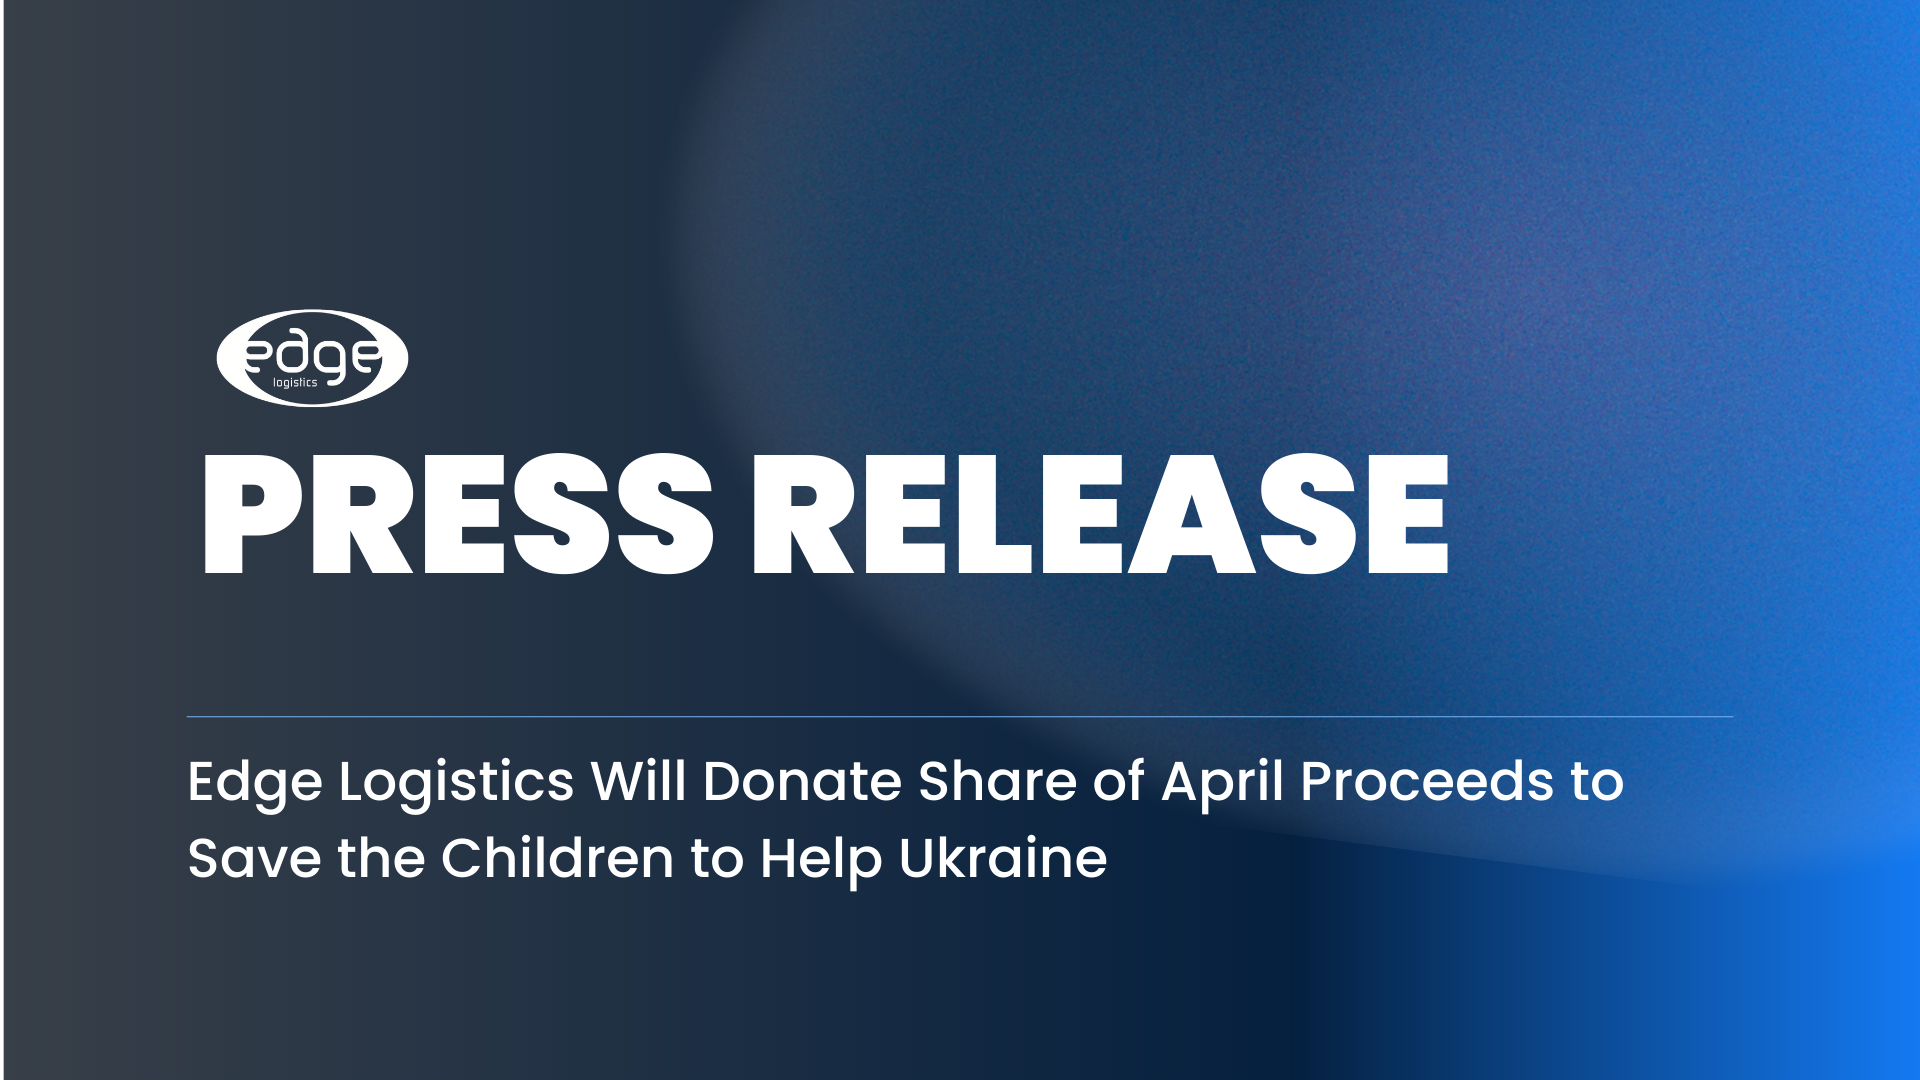 Edge Logistics Will Donate Share of April Proceeds to Save the Children to Help Ukraine